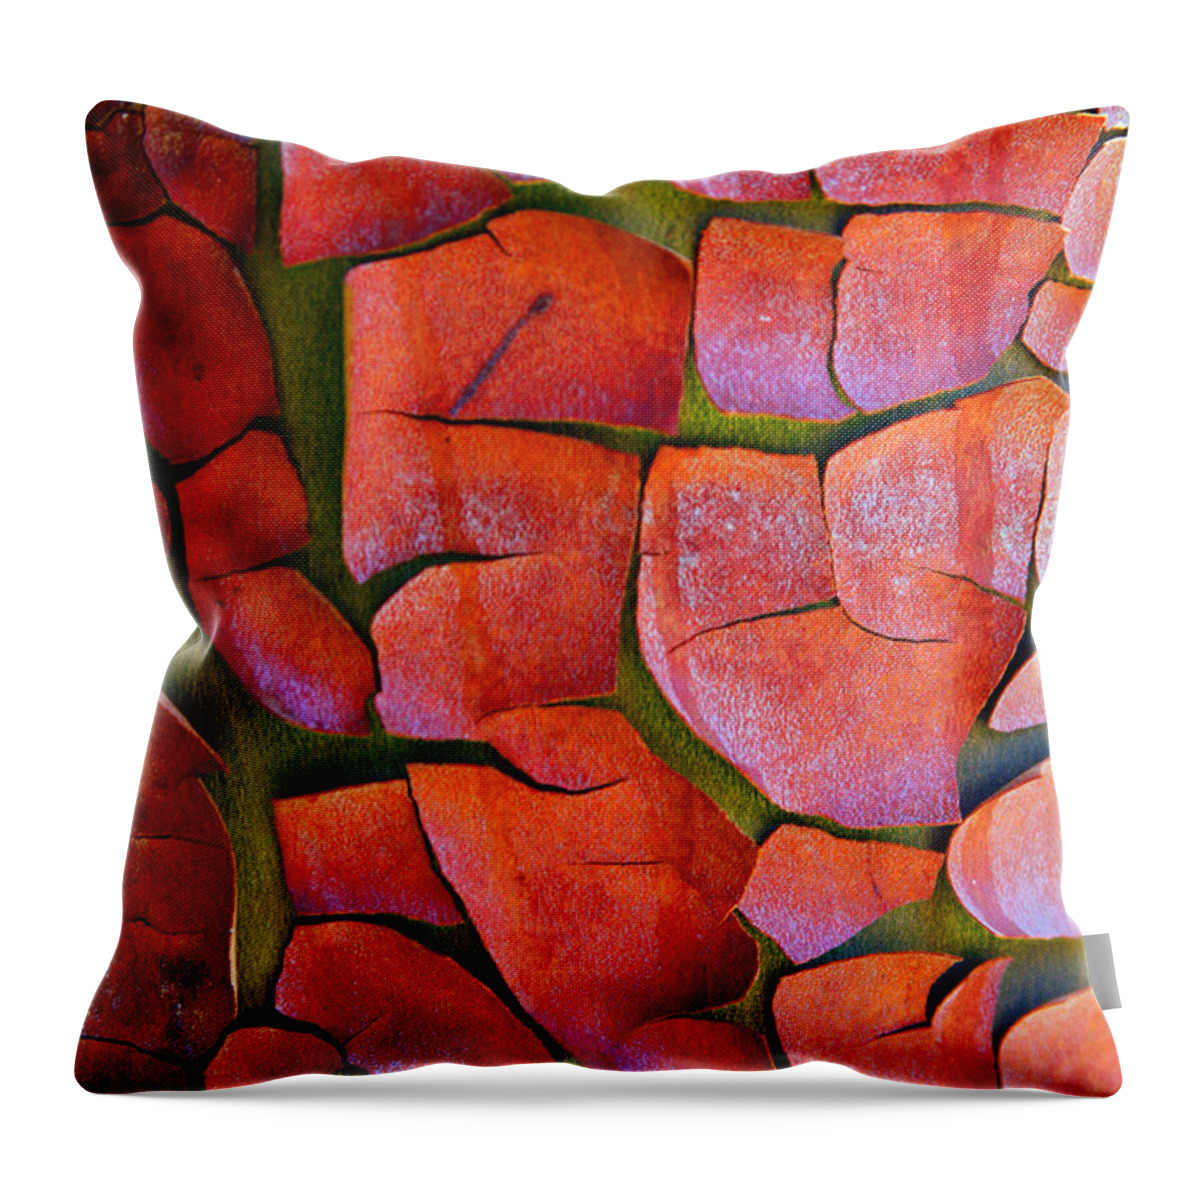 Pacific Madrona Tree Bark Throw Pillow featuring the photograph Madrone by Marie Jamieson